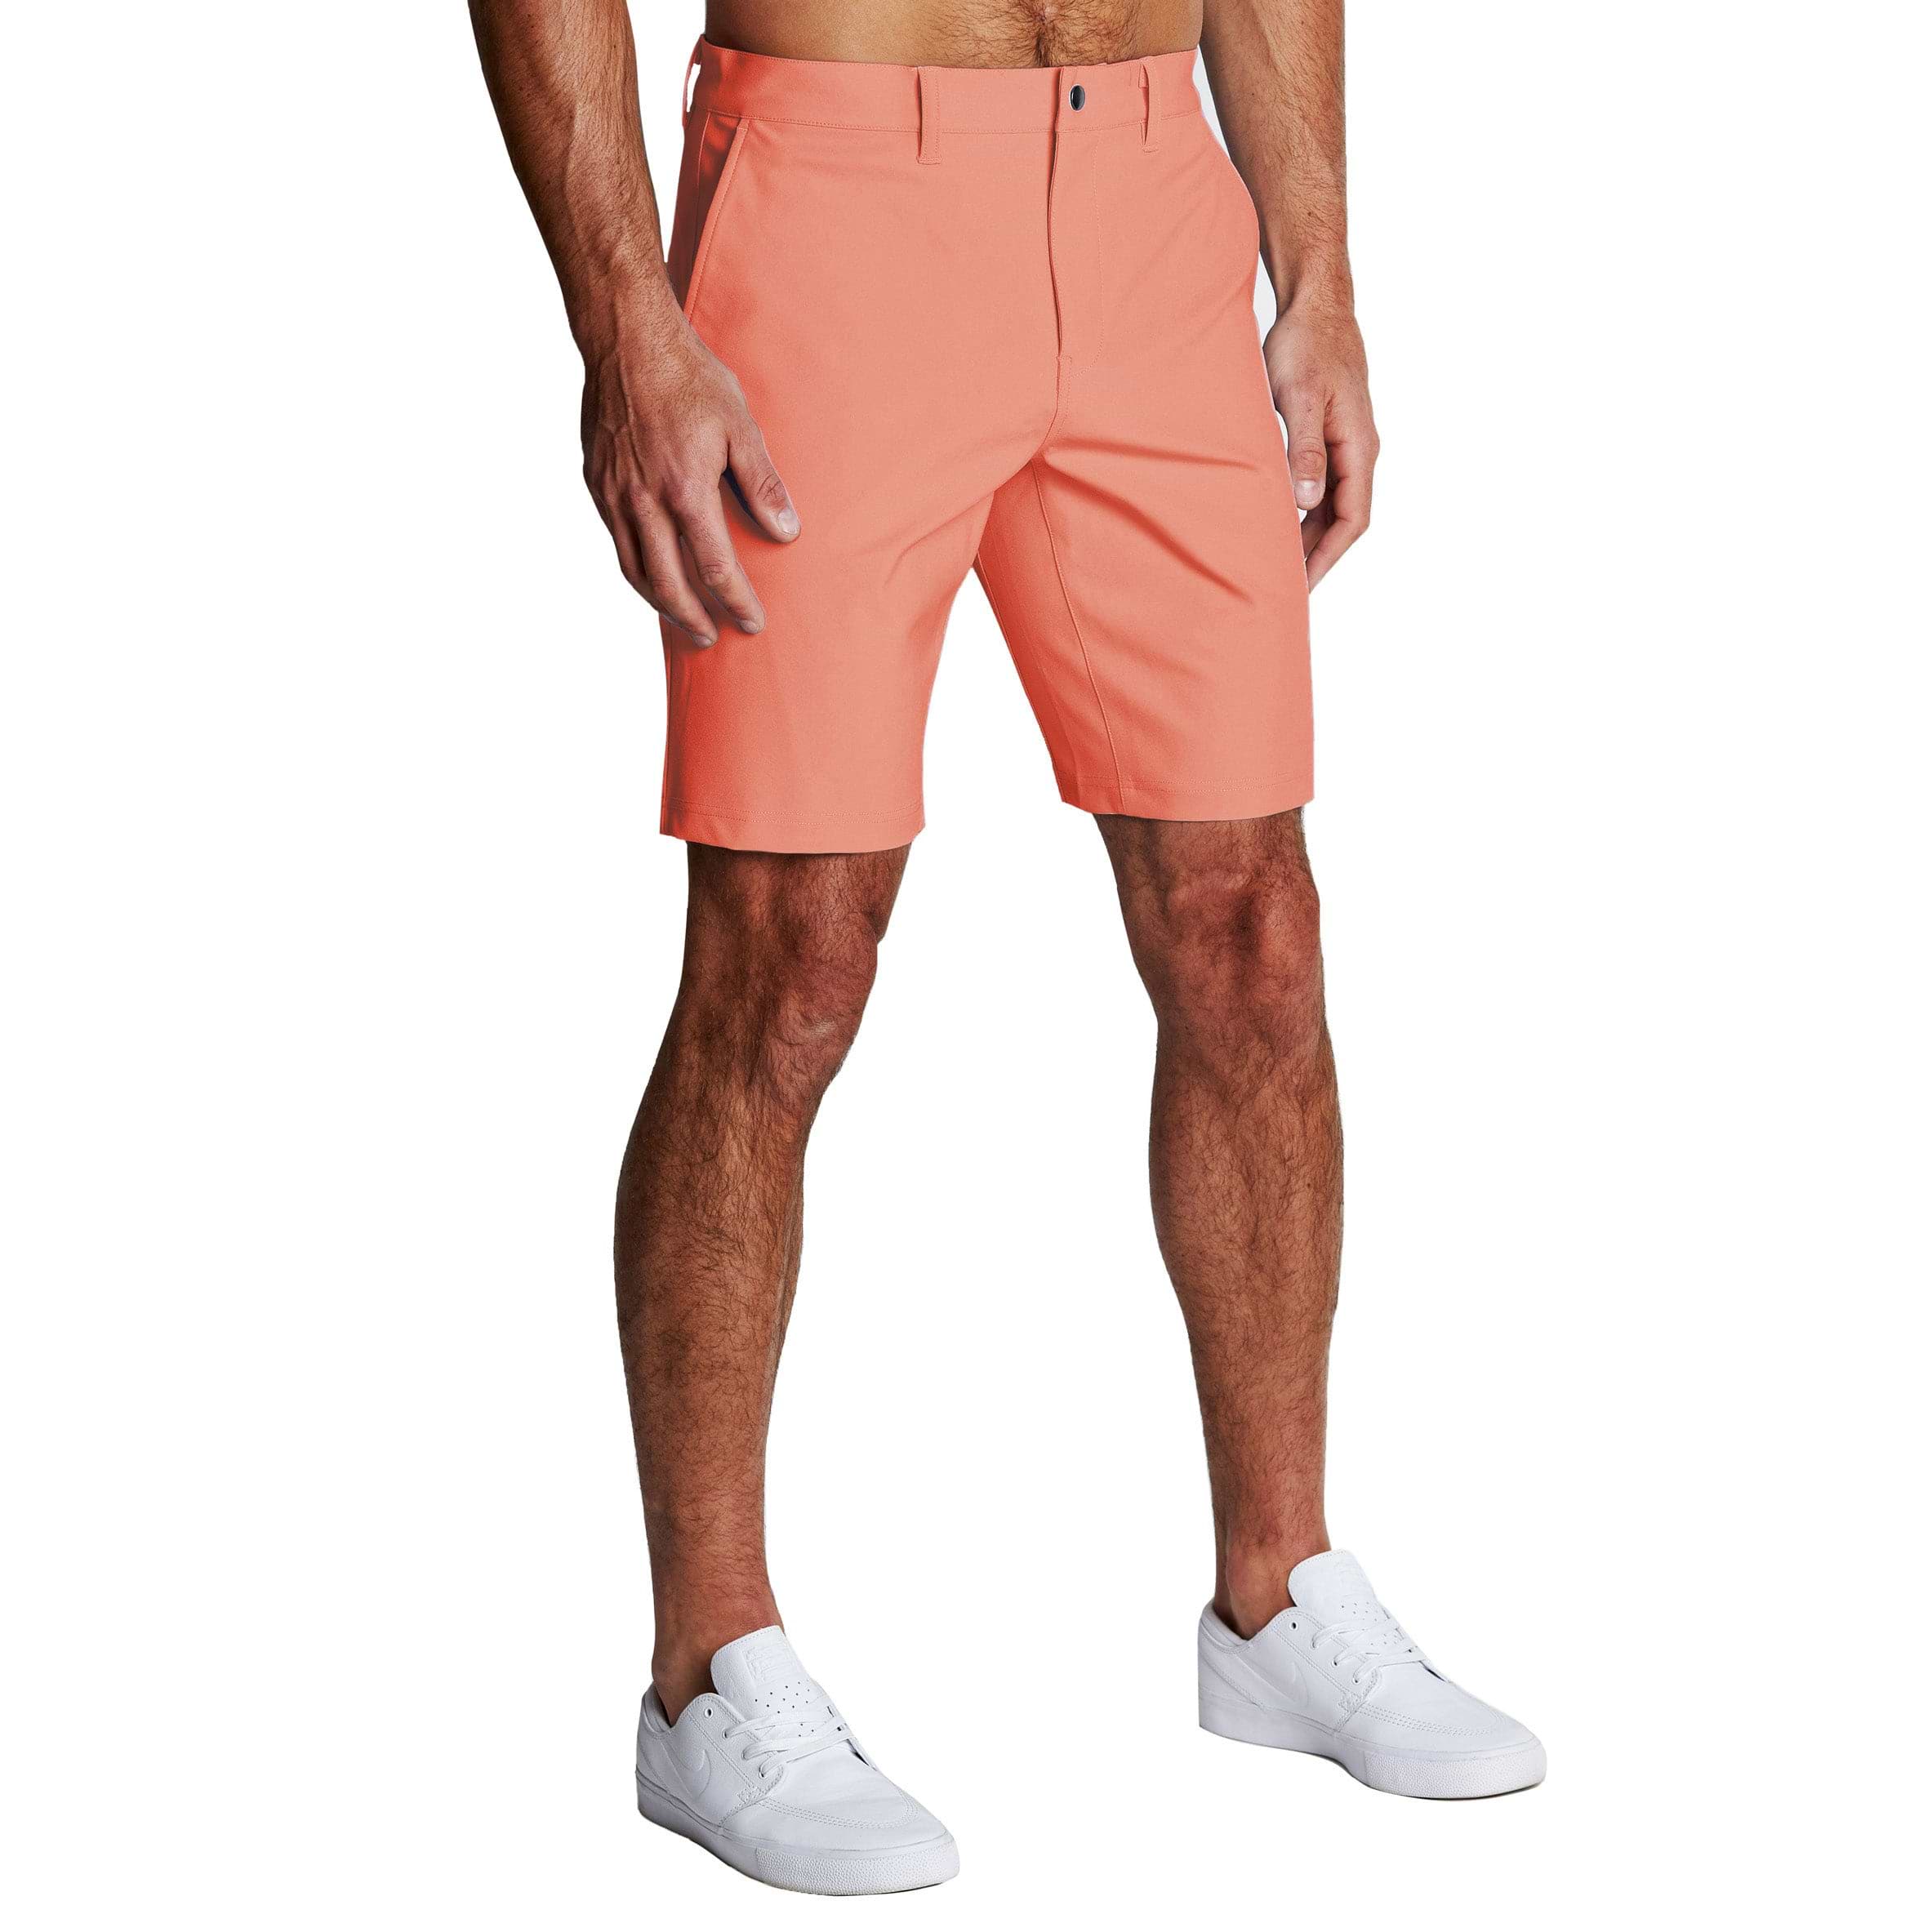 Athletic Fit Shorts - Salmon